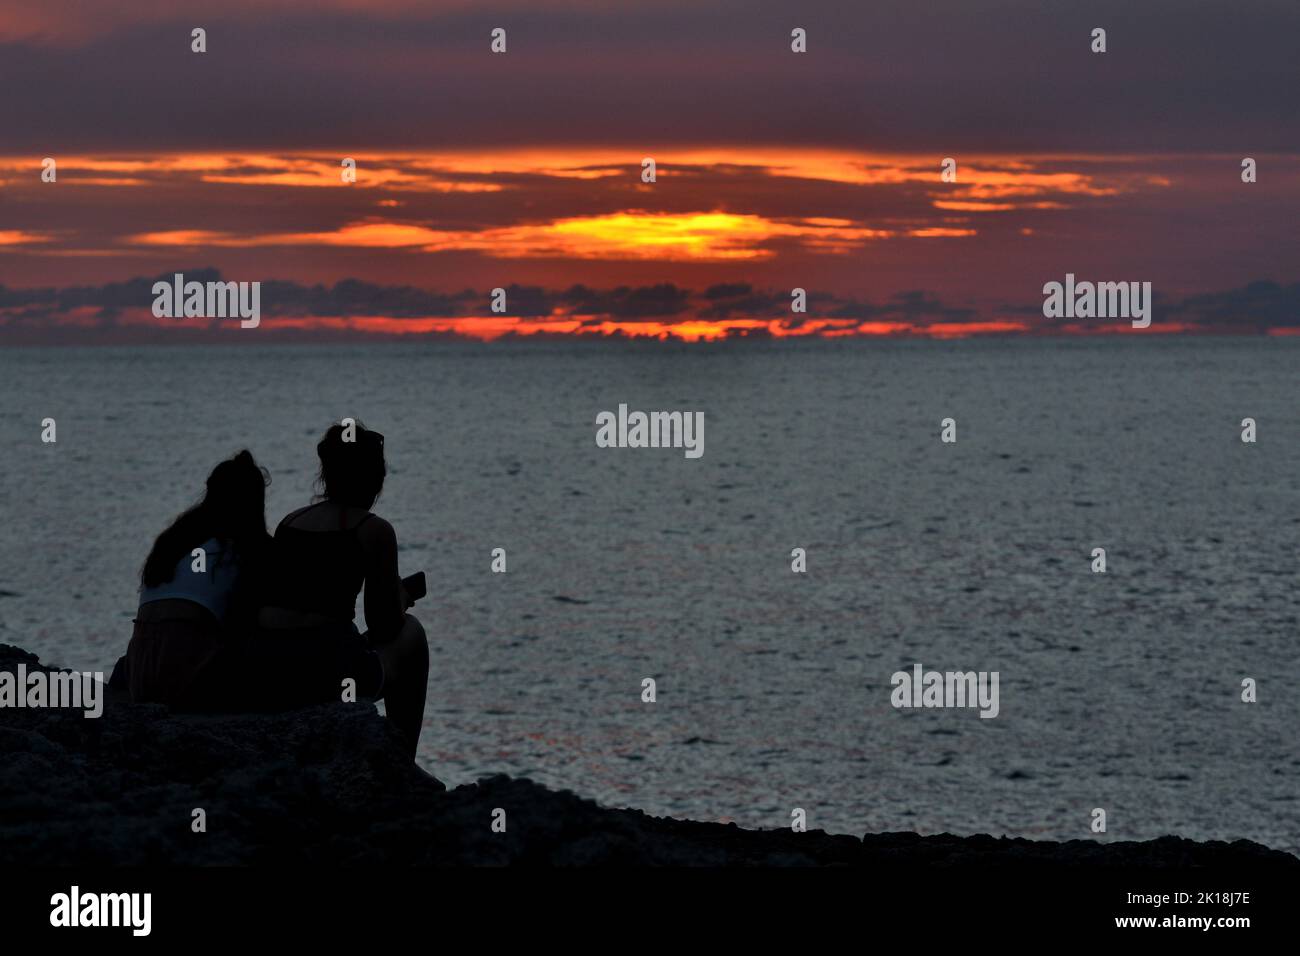 Sunset at Cala Blanca, near Cuitadella, Minorca, featuring couples silhouetted against the sky Stock Photo